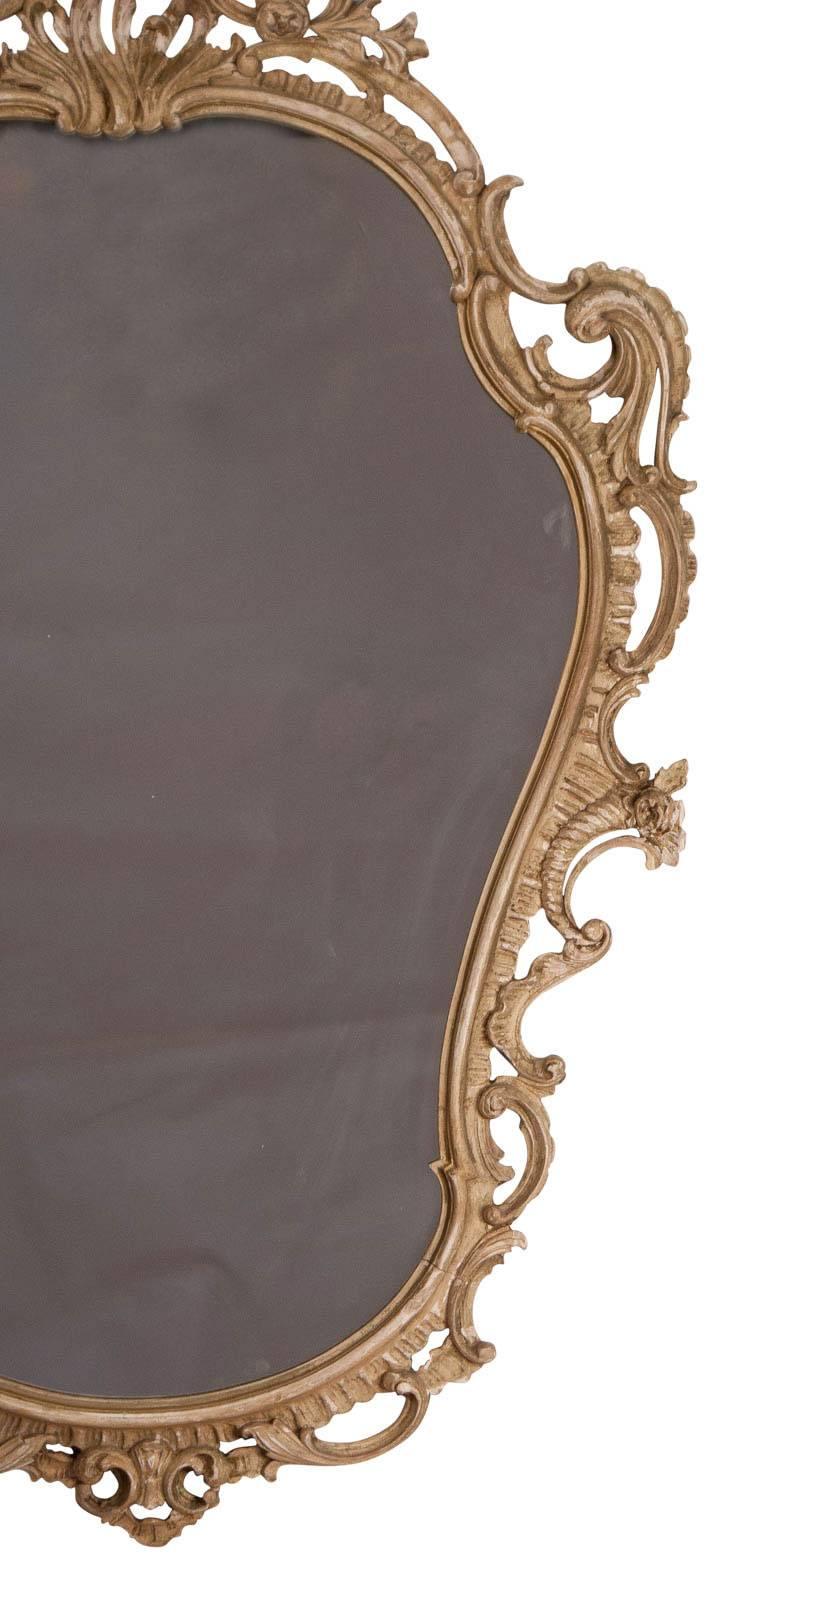 A large and decorative hand-carved and painted wood vintage mirror. Although the inspiration for this piece comes from the continent it was made in England, circa 1920. This eccentric Baroque style was seen in England about 1750 and reflected in the